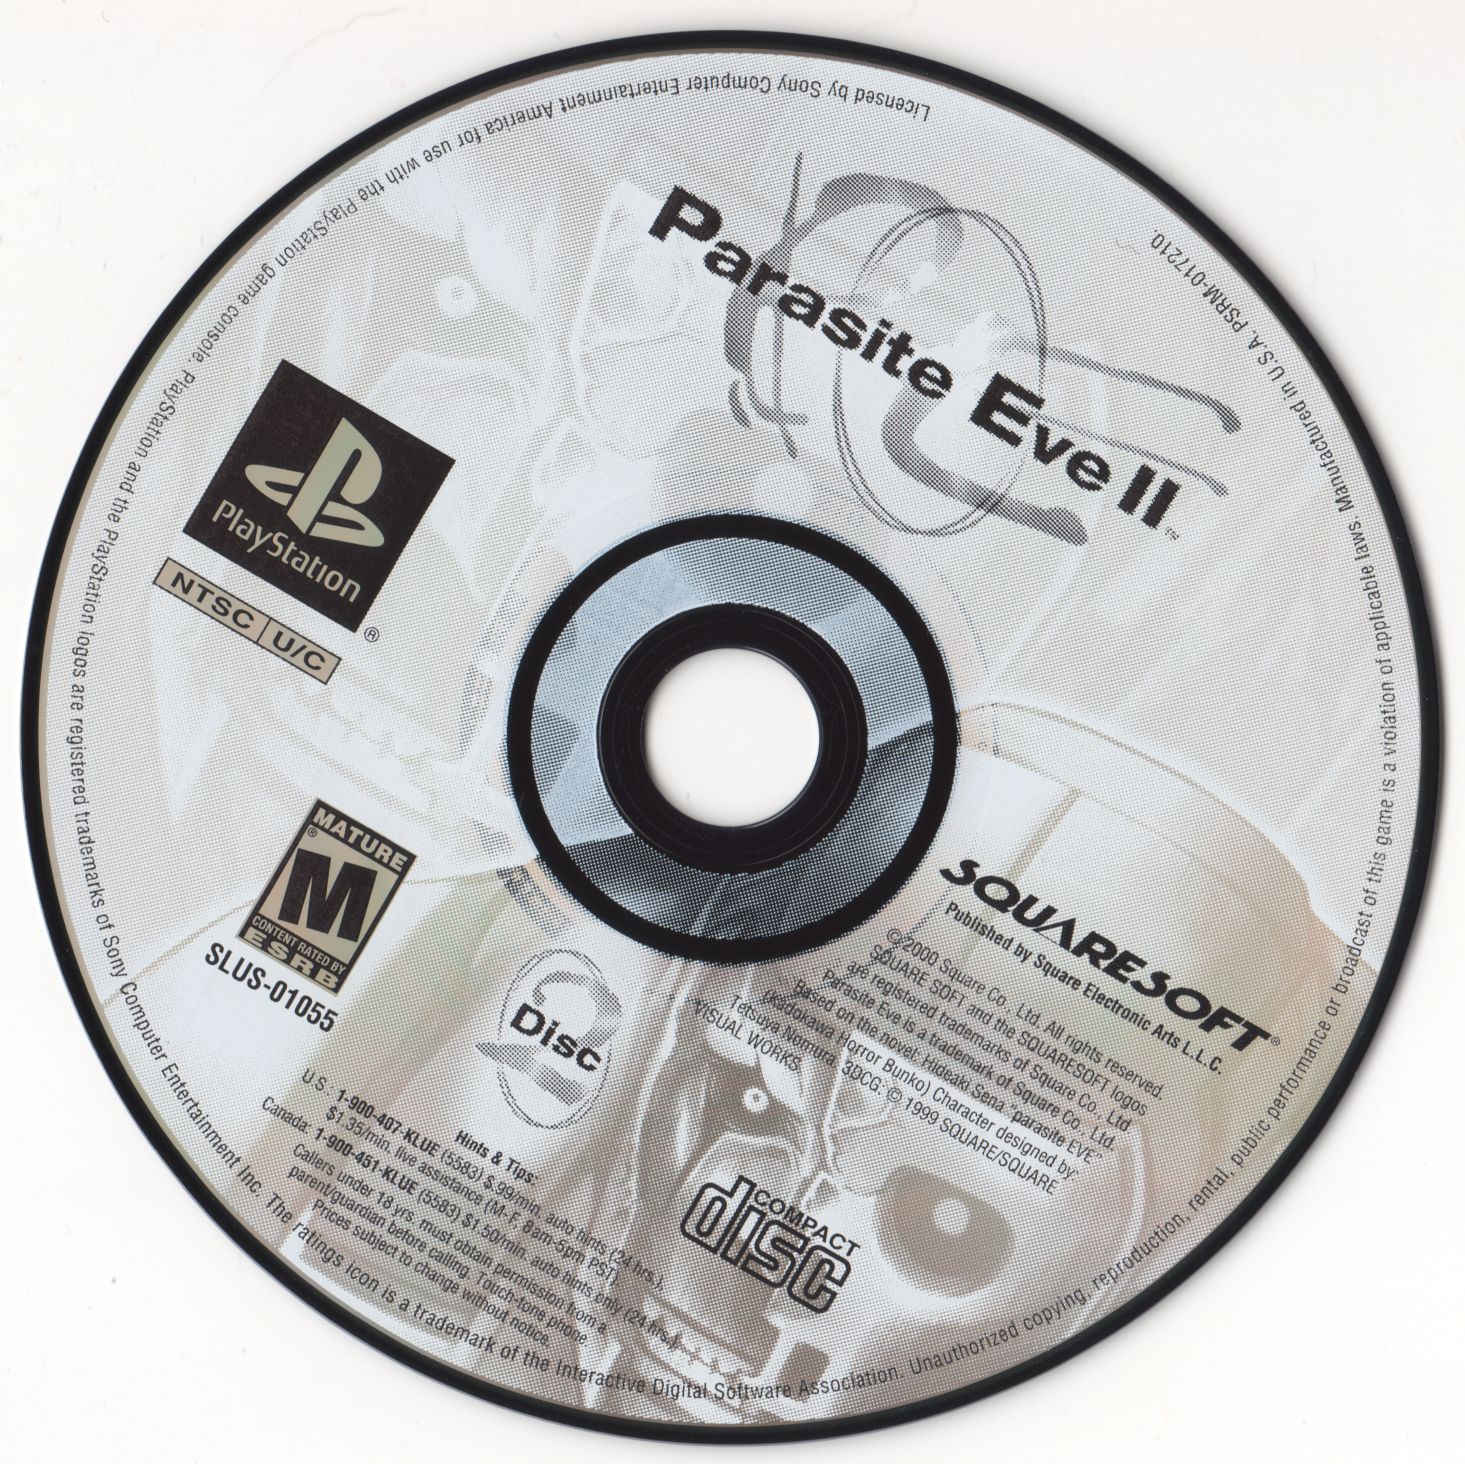 Parasite Eve 2 Disc 1 of 2 (USA) Sony PlayStation (PSX) ISO